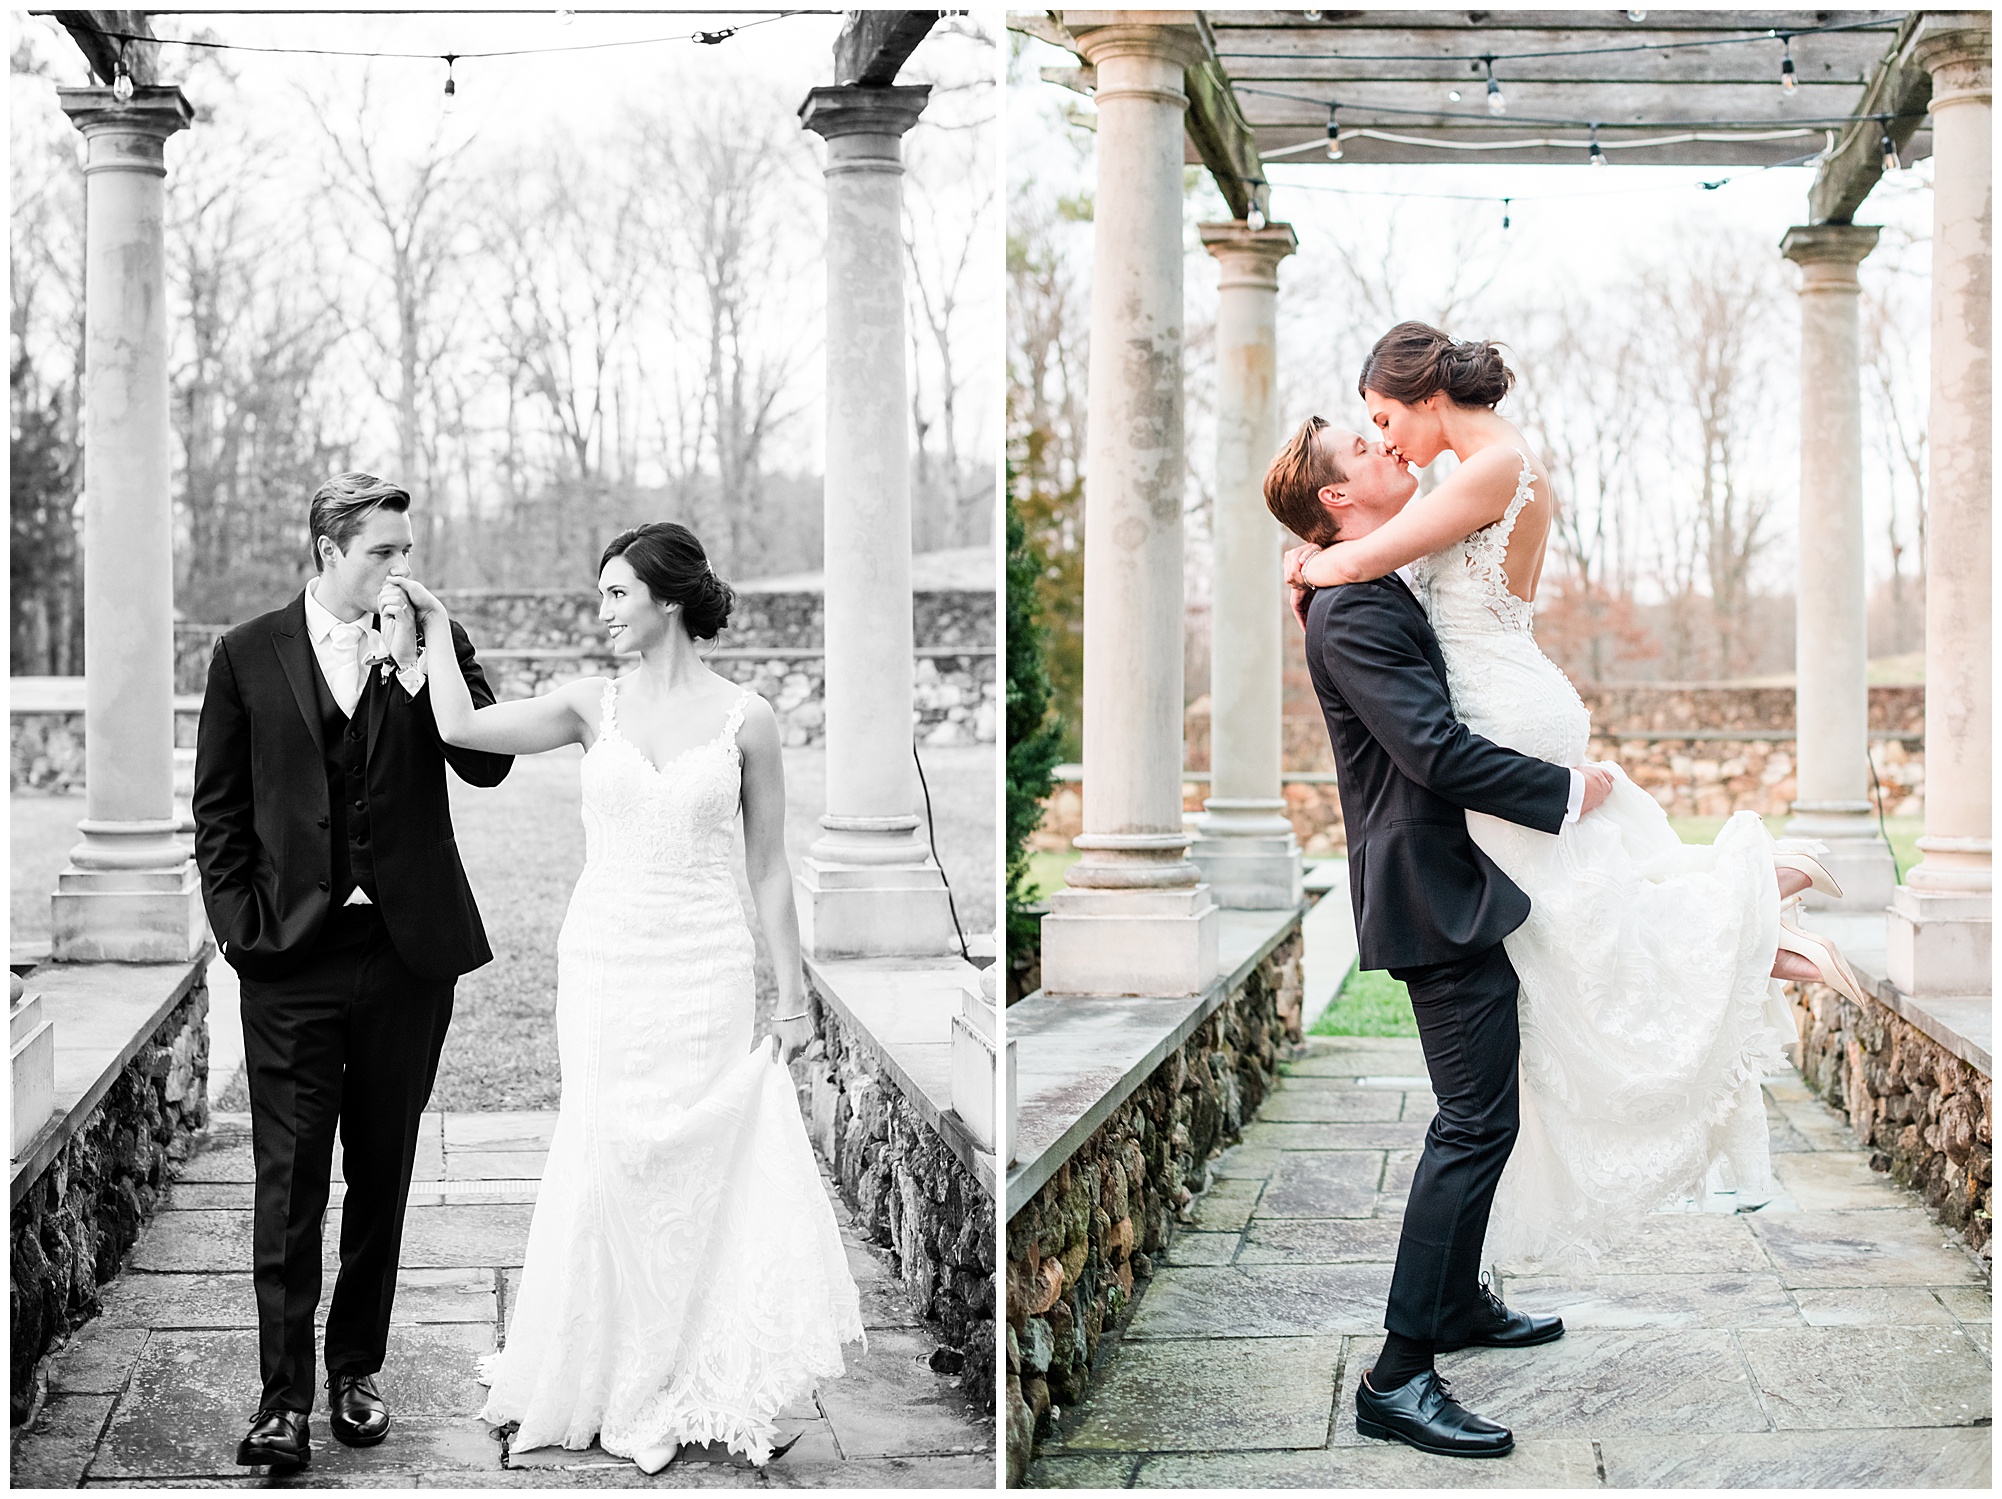 bride and groom formal portraits at dover hall estate. by sarah & dave photographer, richmond rva wedding photographer.